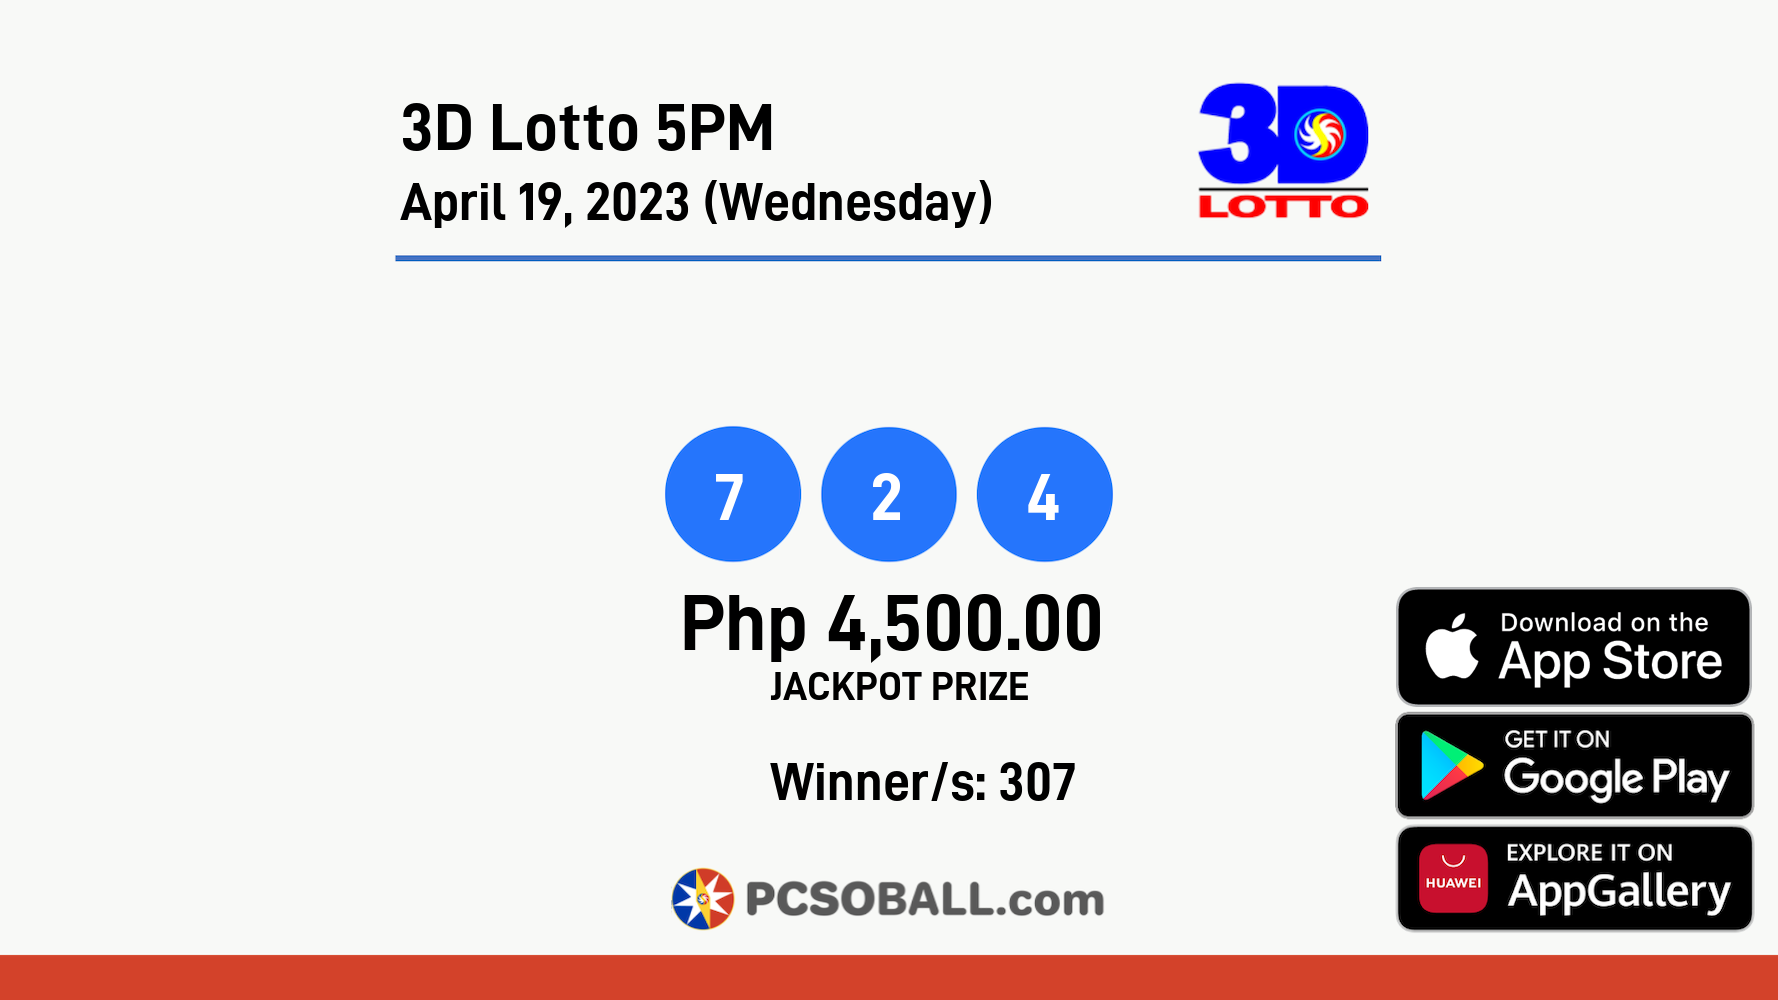 3D Lotto 5PM April 19, 2023 (Wednesday) Result